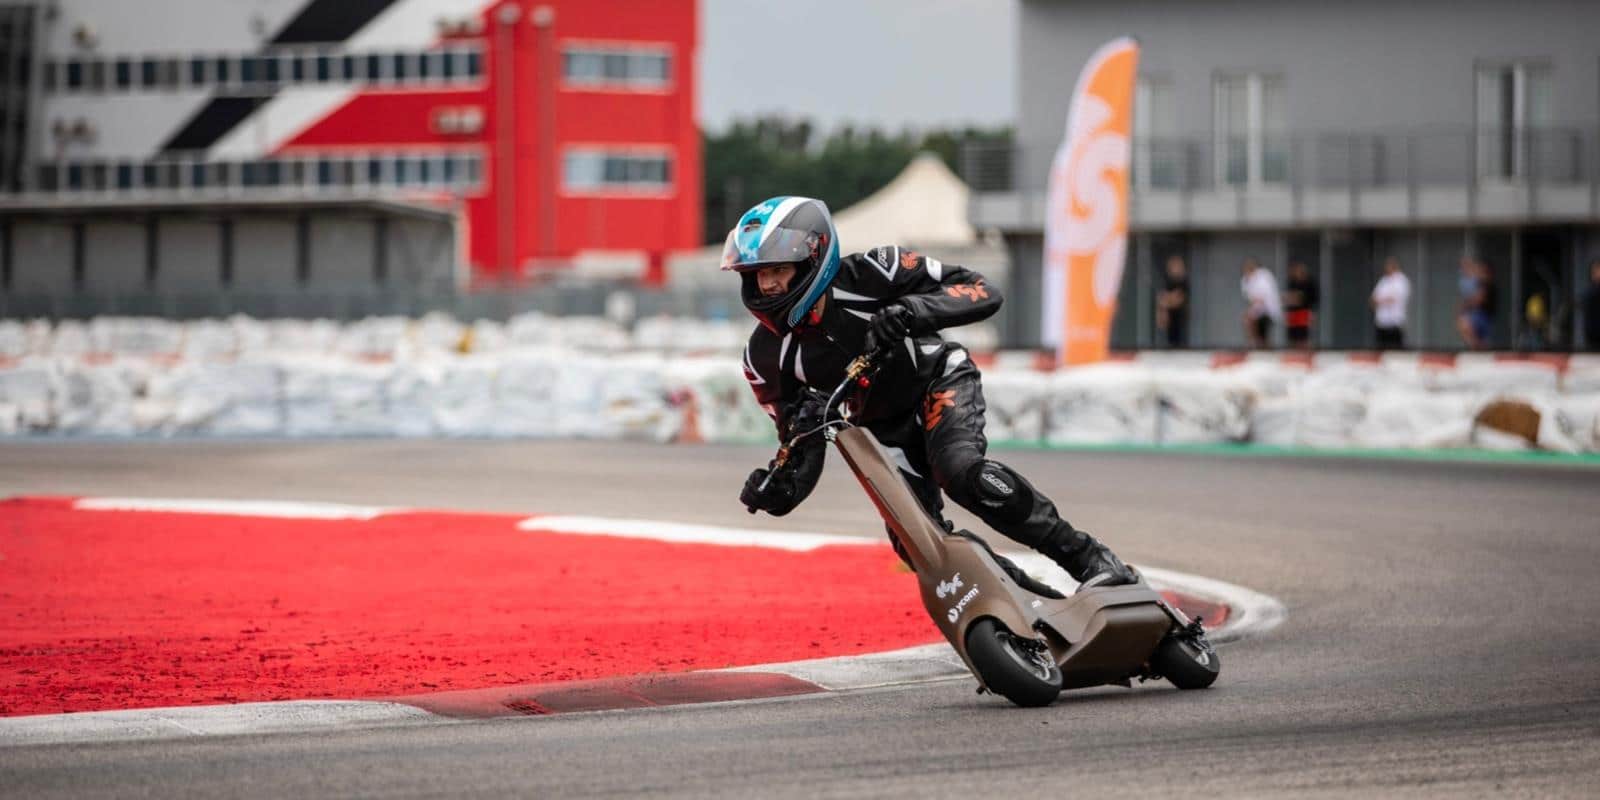 A closer look at the Helbiz 12 kW racing electric scooters